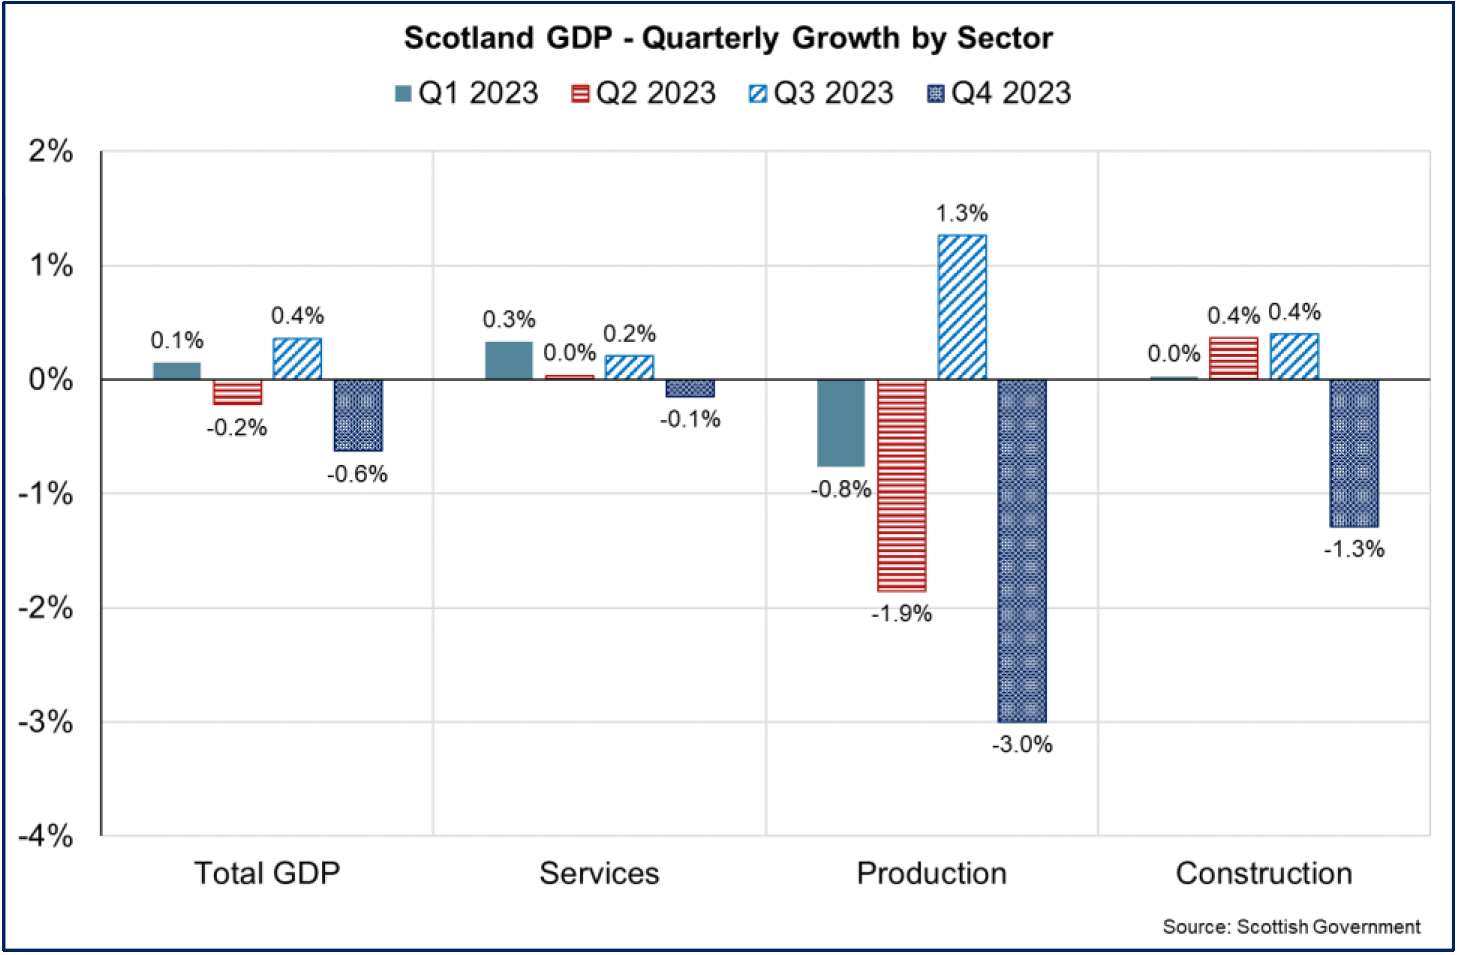 Scotland GDP fell in the services, production and construction sectors in the fourth quarter of 2023